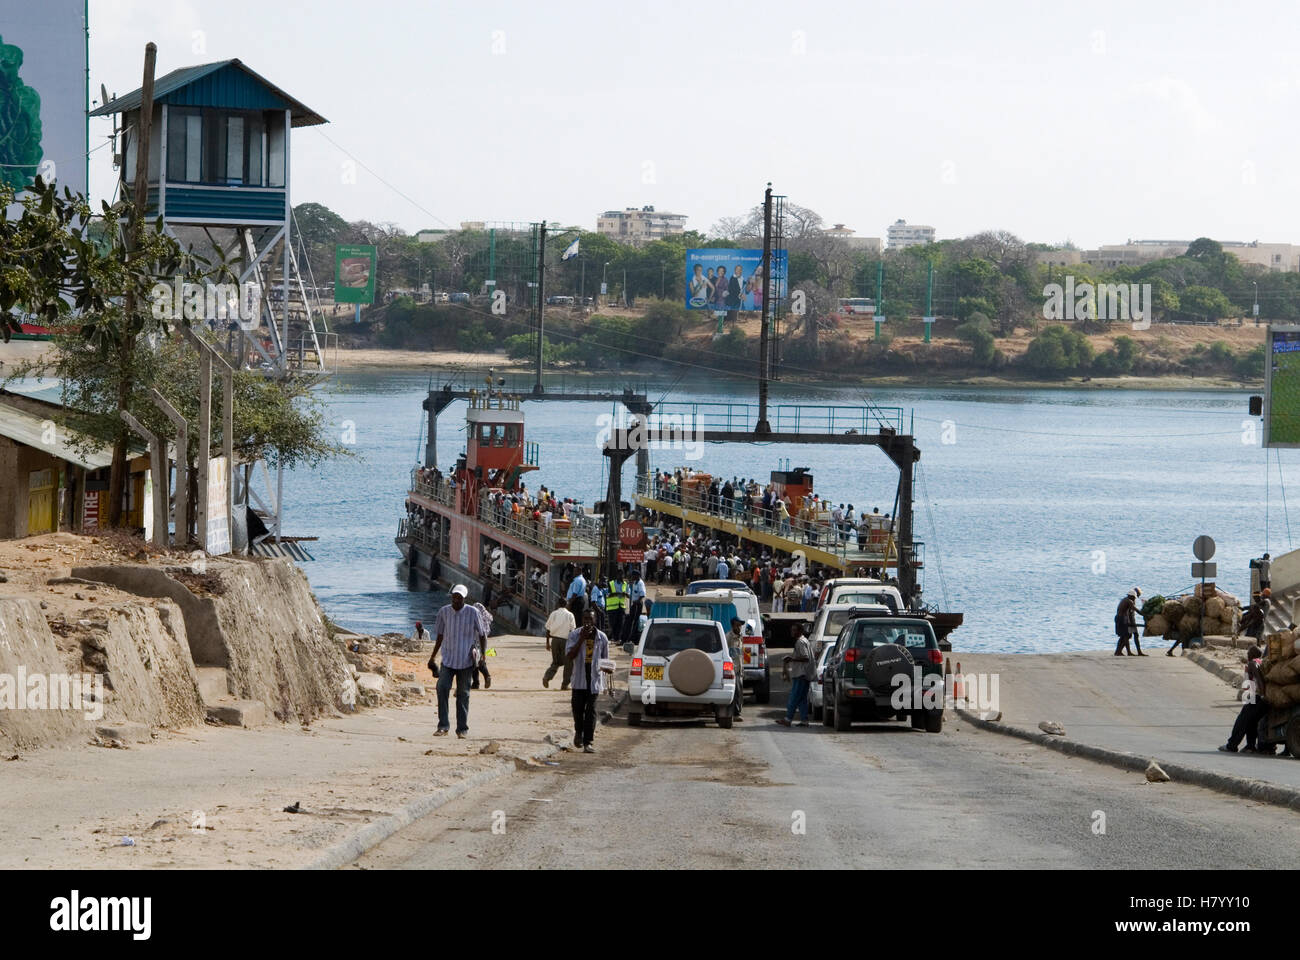 Likoni ferry carrying road and foot traffic in Mombasa, Kenya, Africa Stock Photo